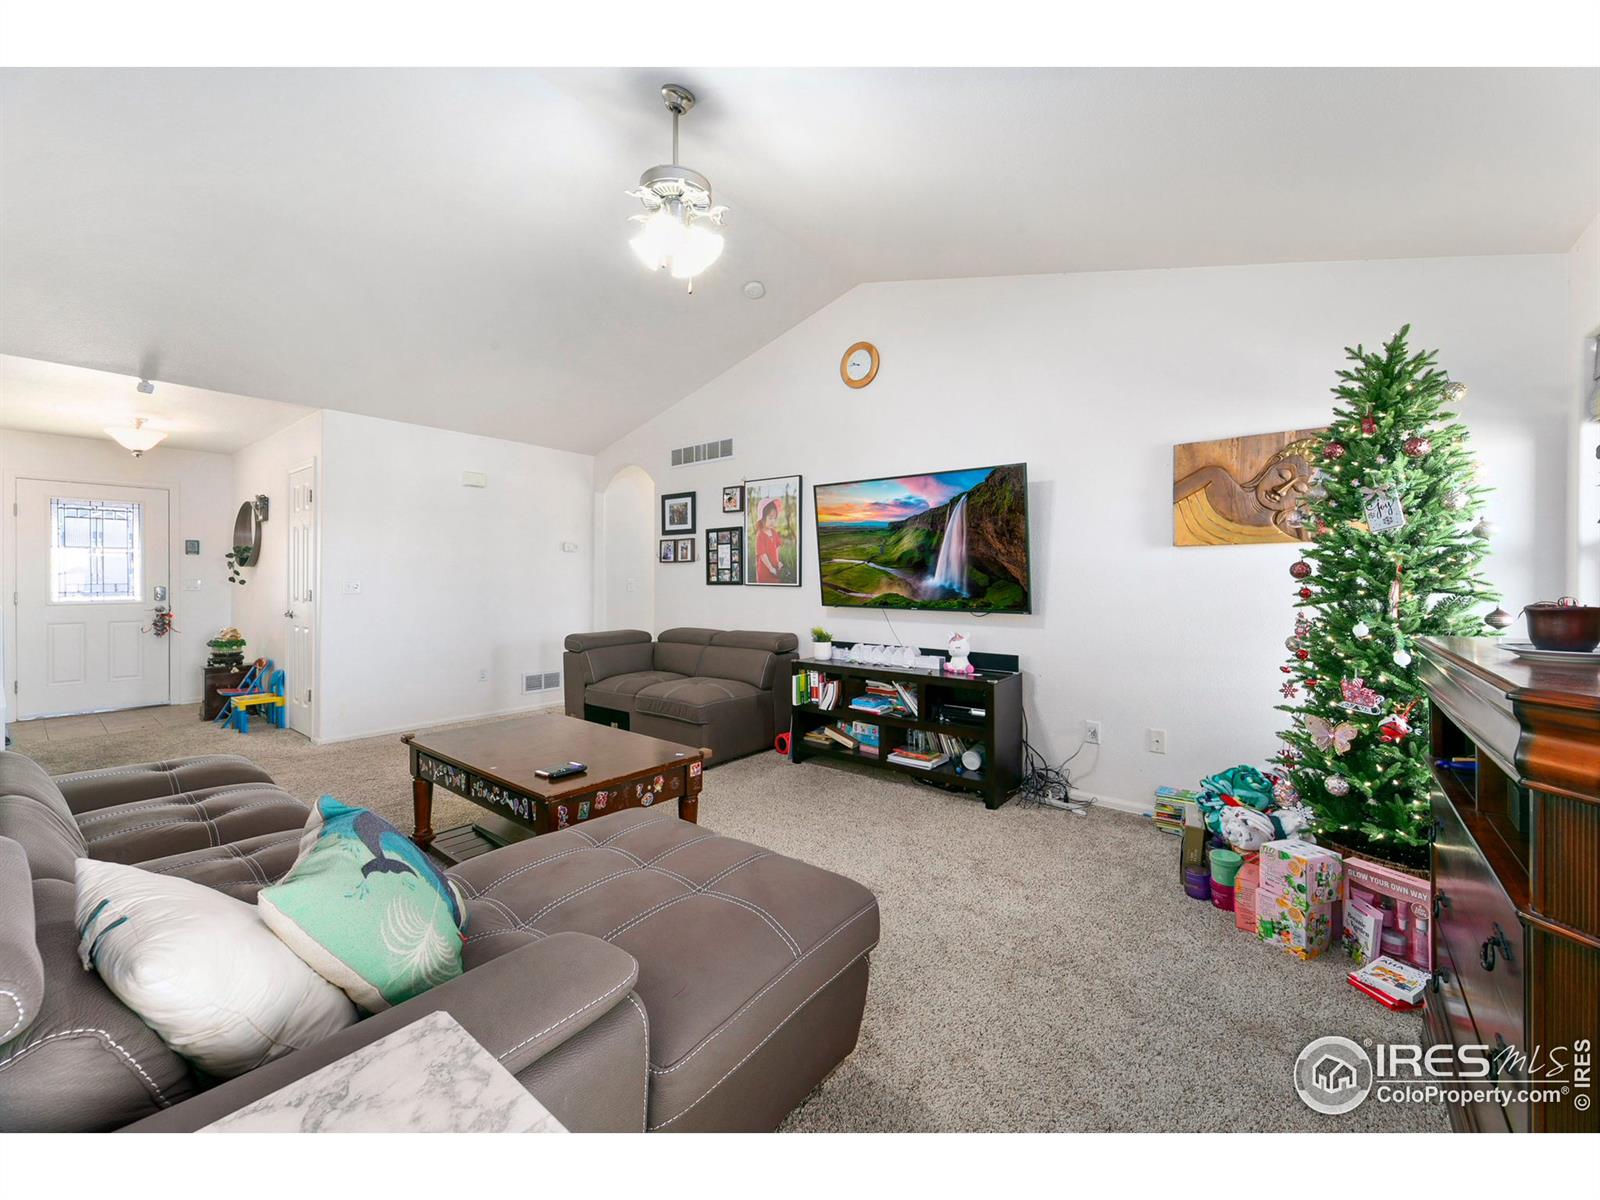 8723 17th, Greeley, CO